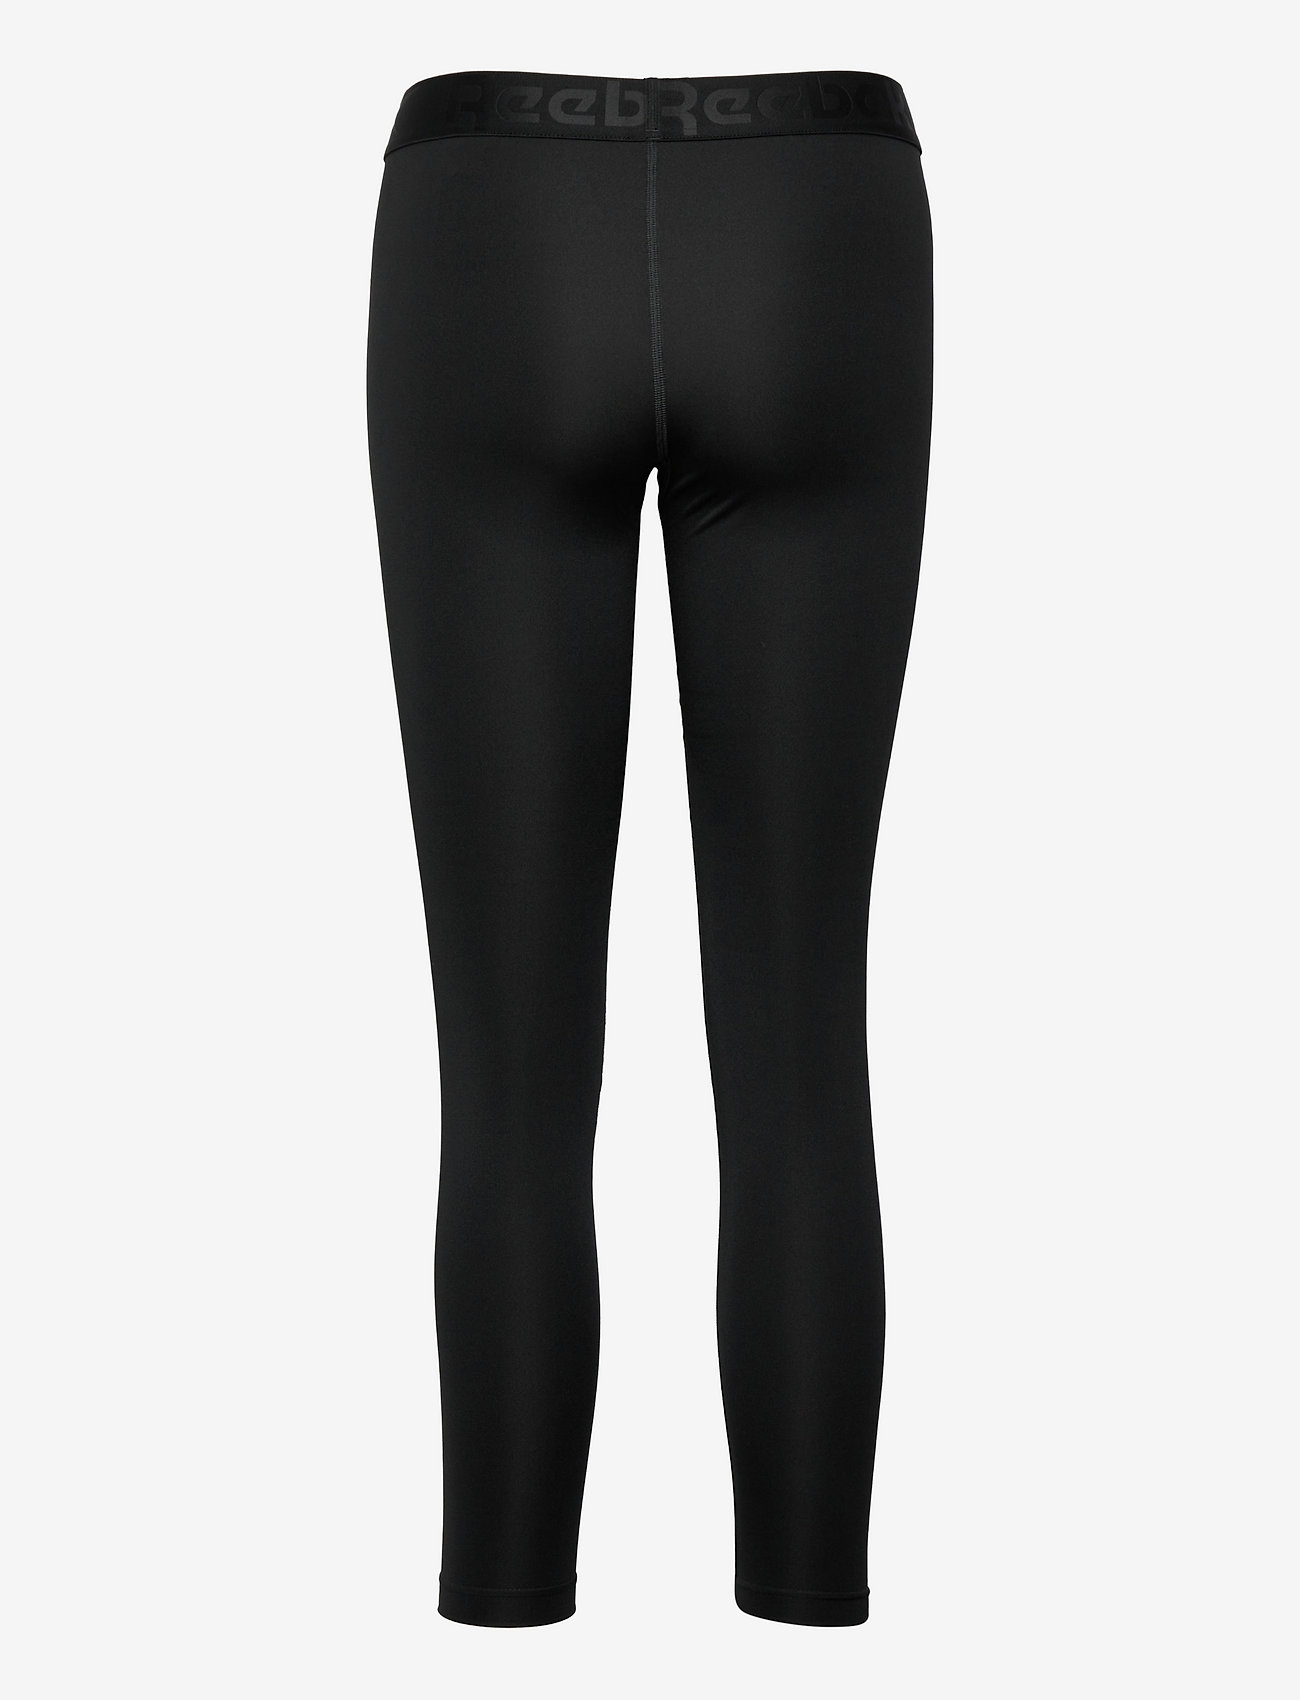 Reebok Performance - WOR COMM TIGHT - lowest prices - nghblk - 1